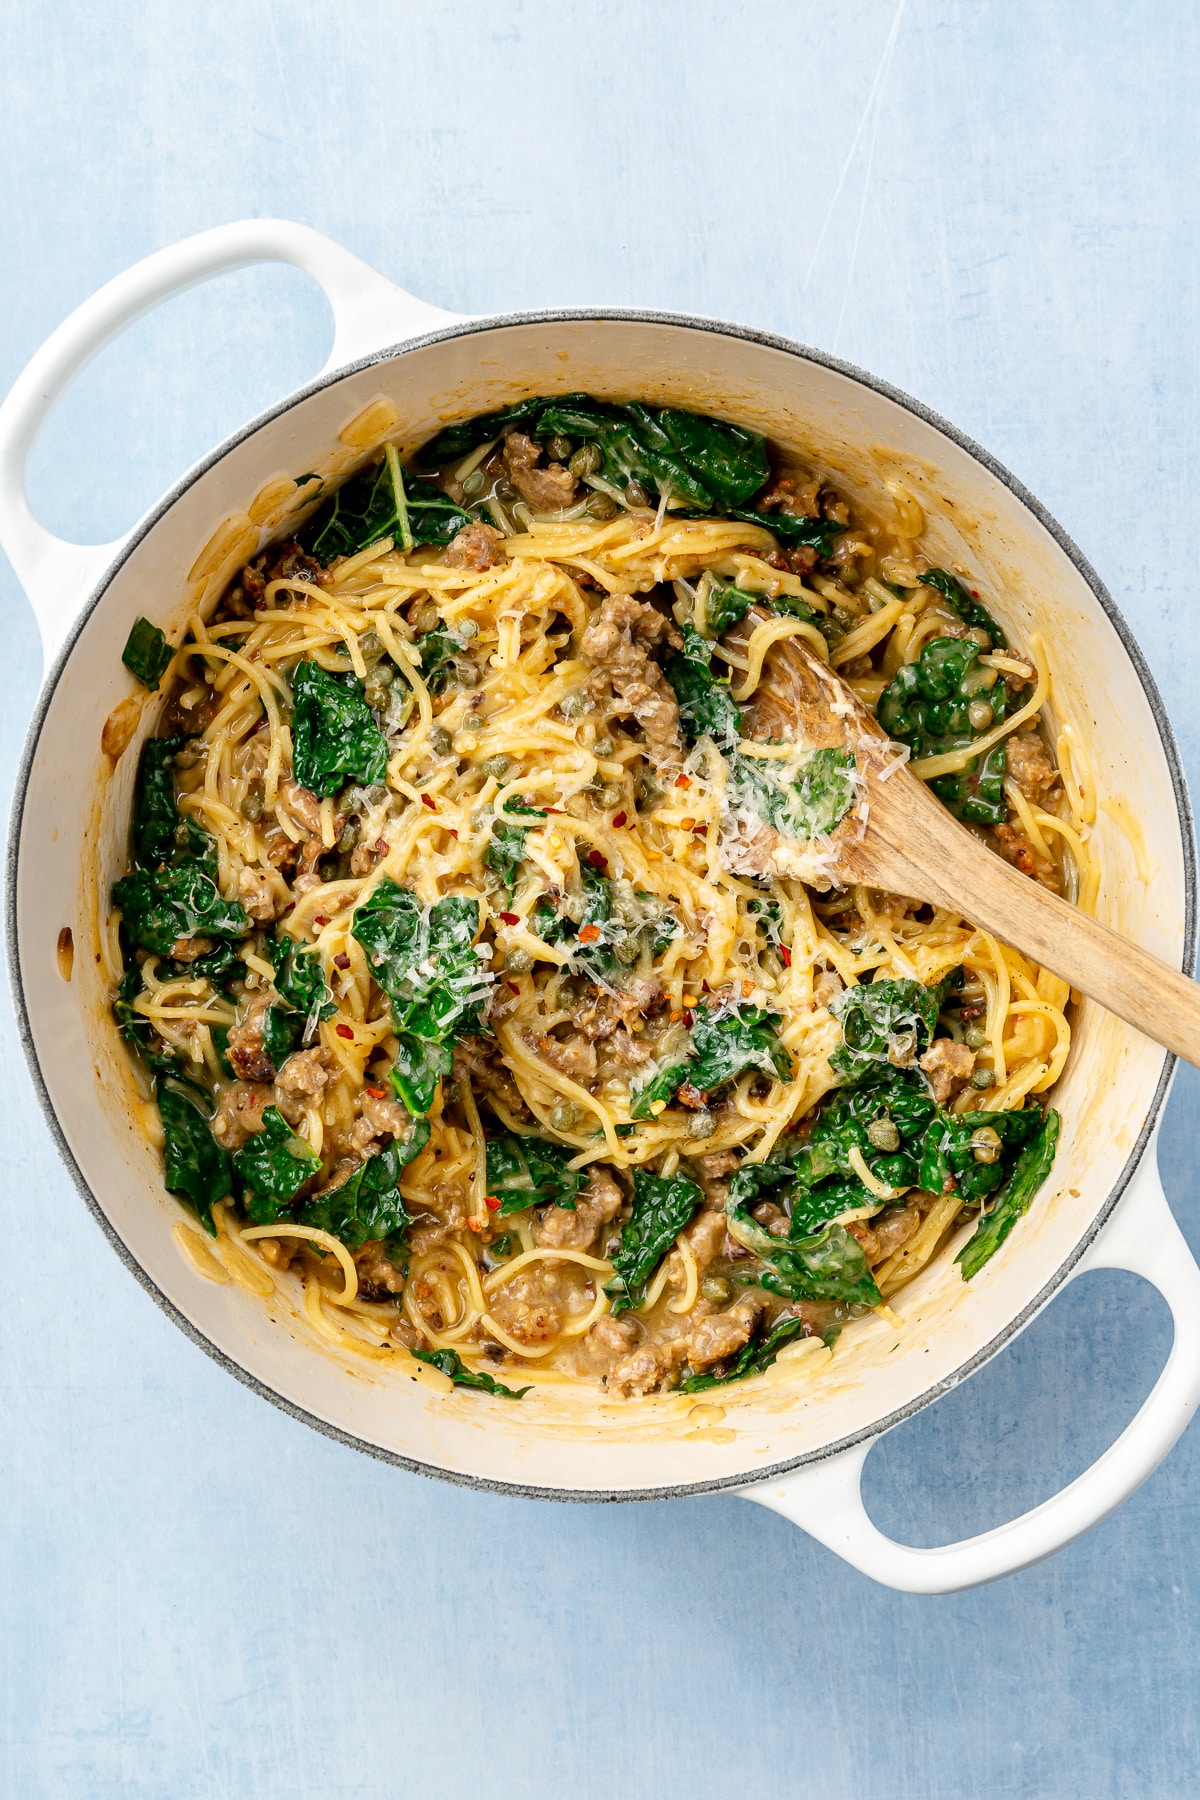 Parmesan cheese has been stirred into the kale, sausage, and spaghetti mixture. The wooden spoon, used to stir, sits in the pot.